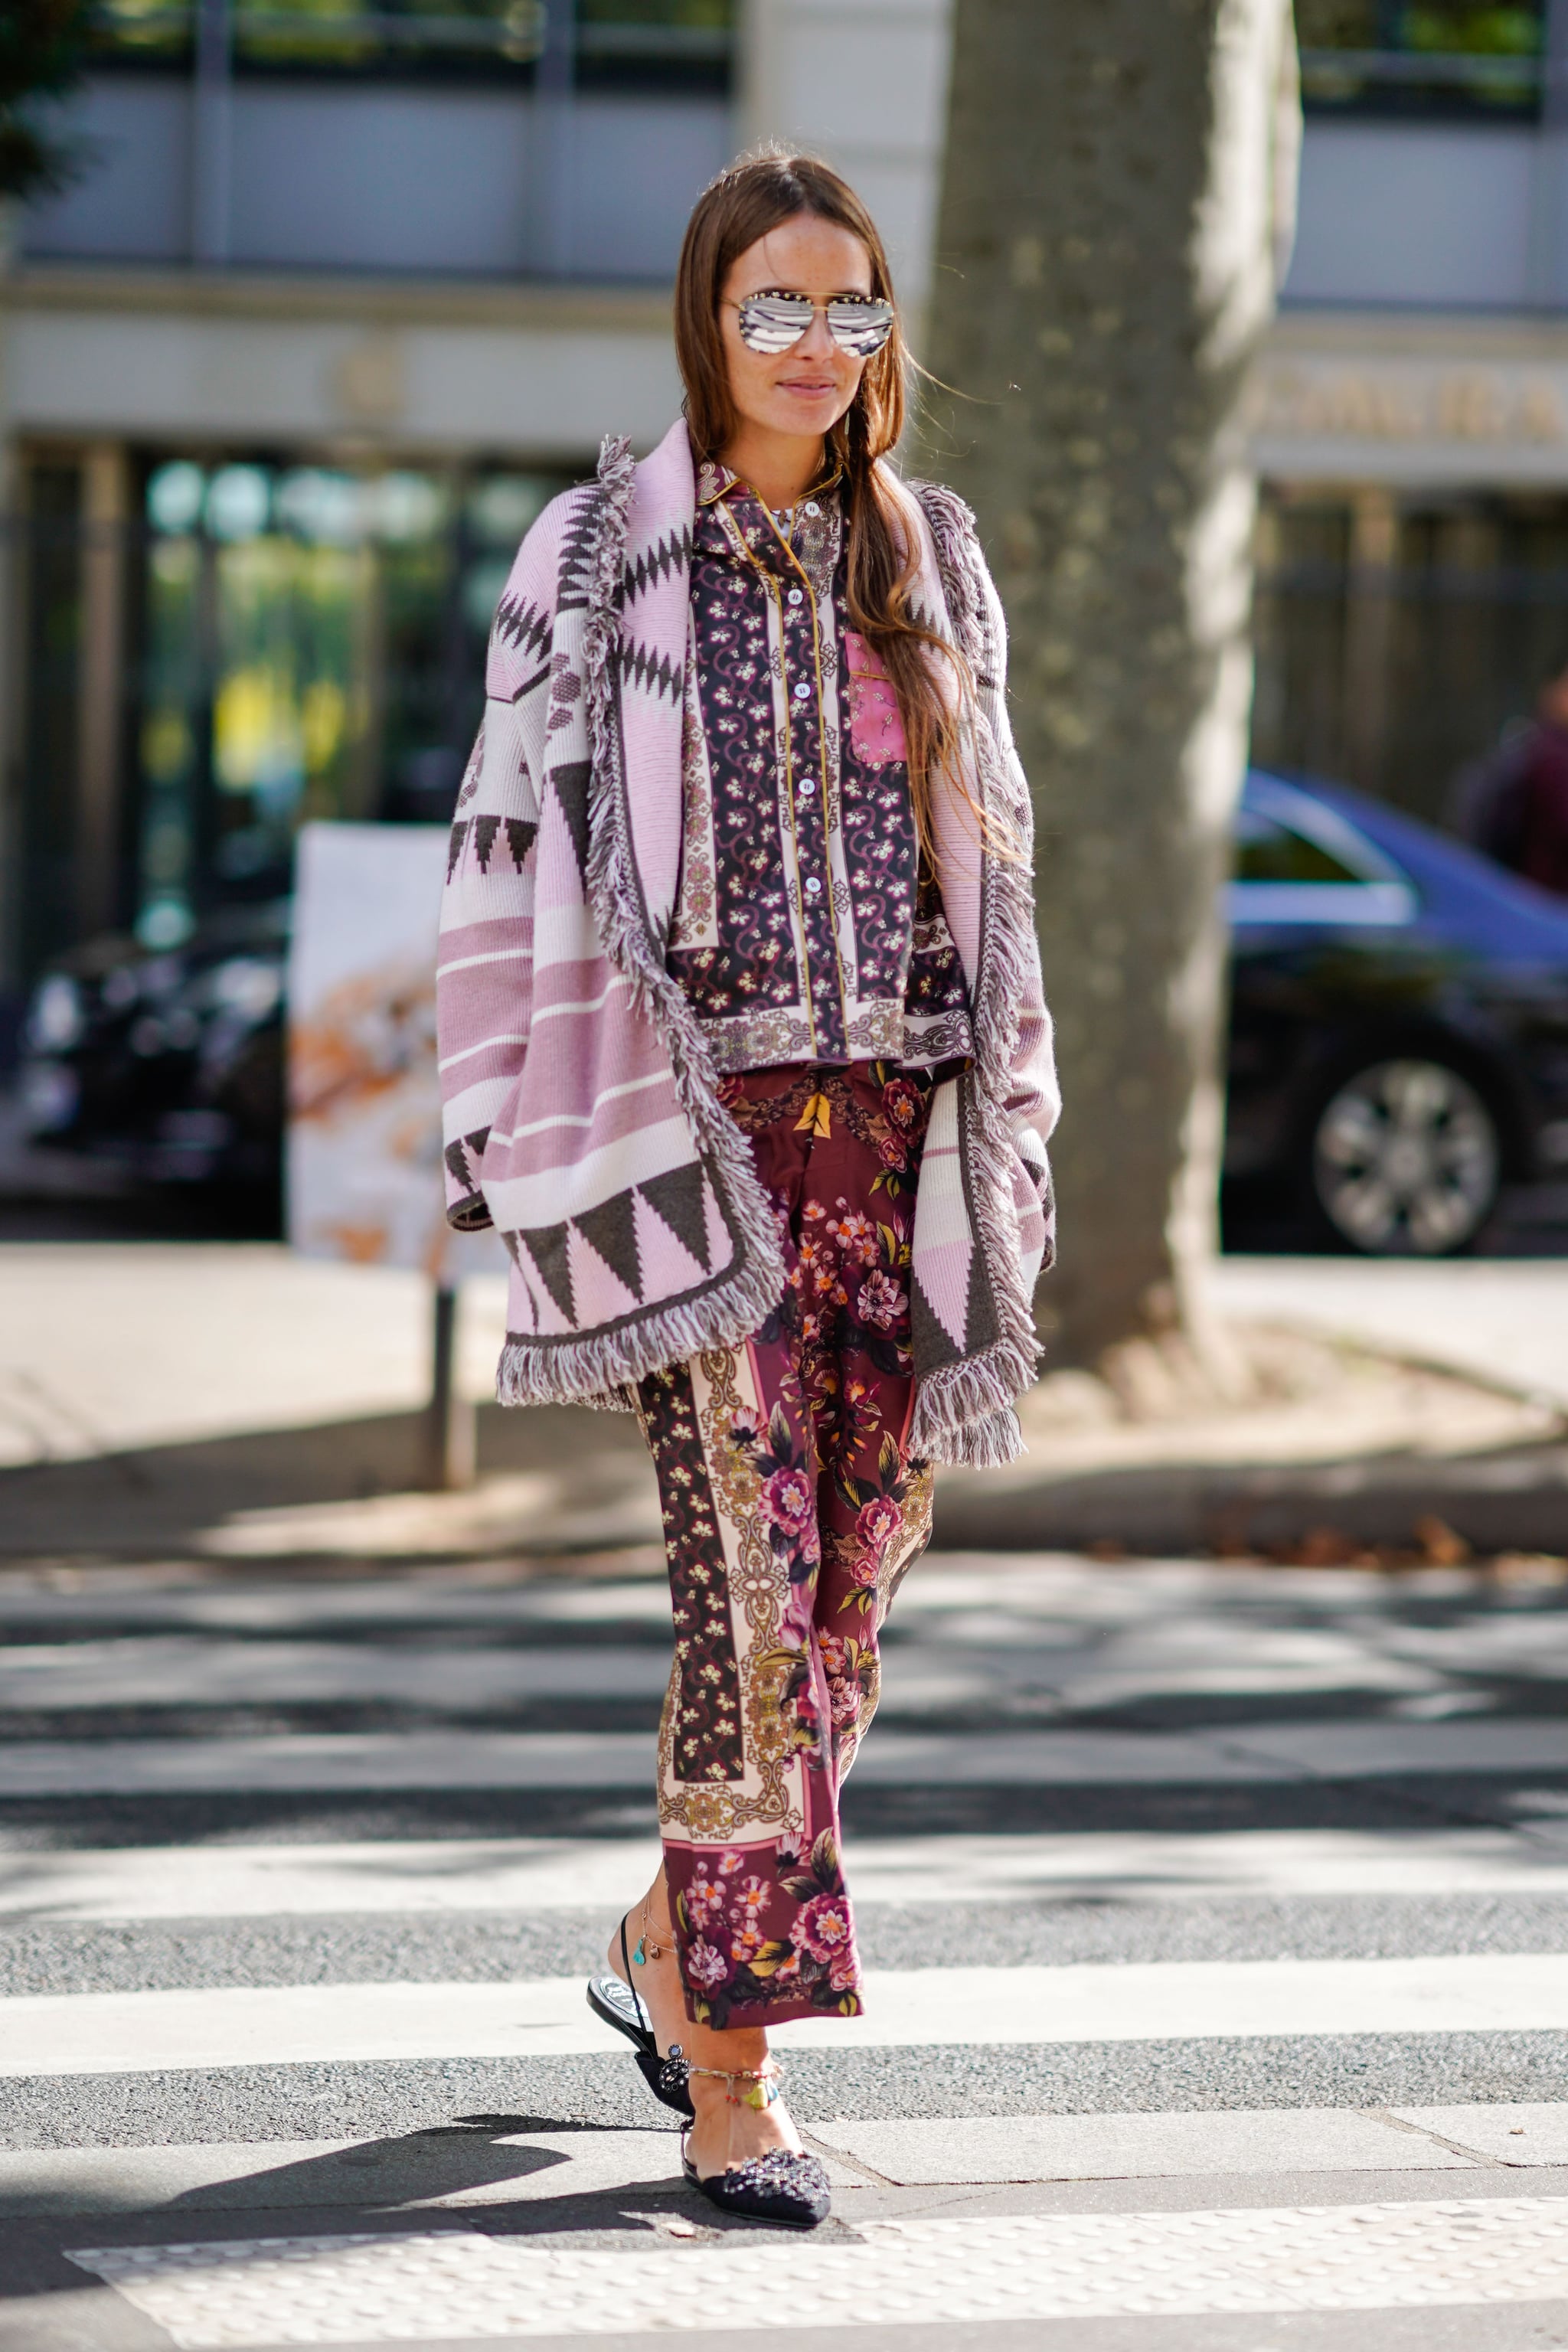 How To Wear Mixed Prints